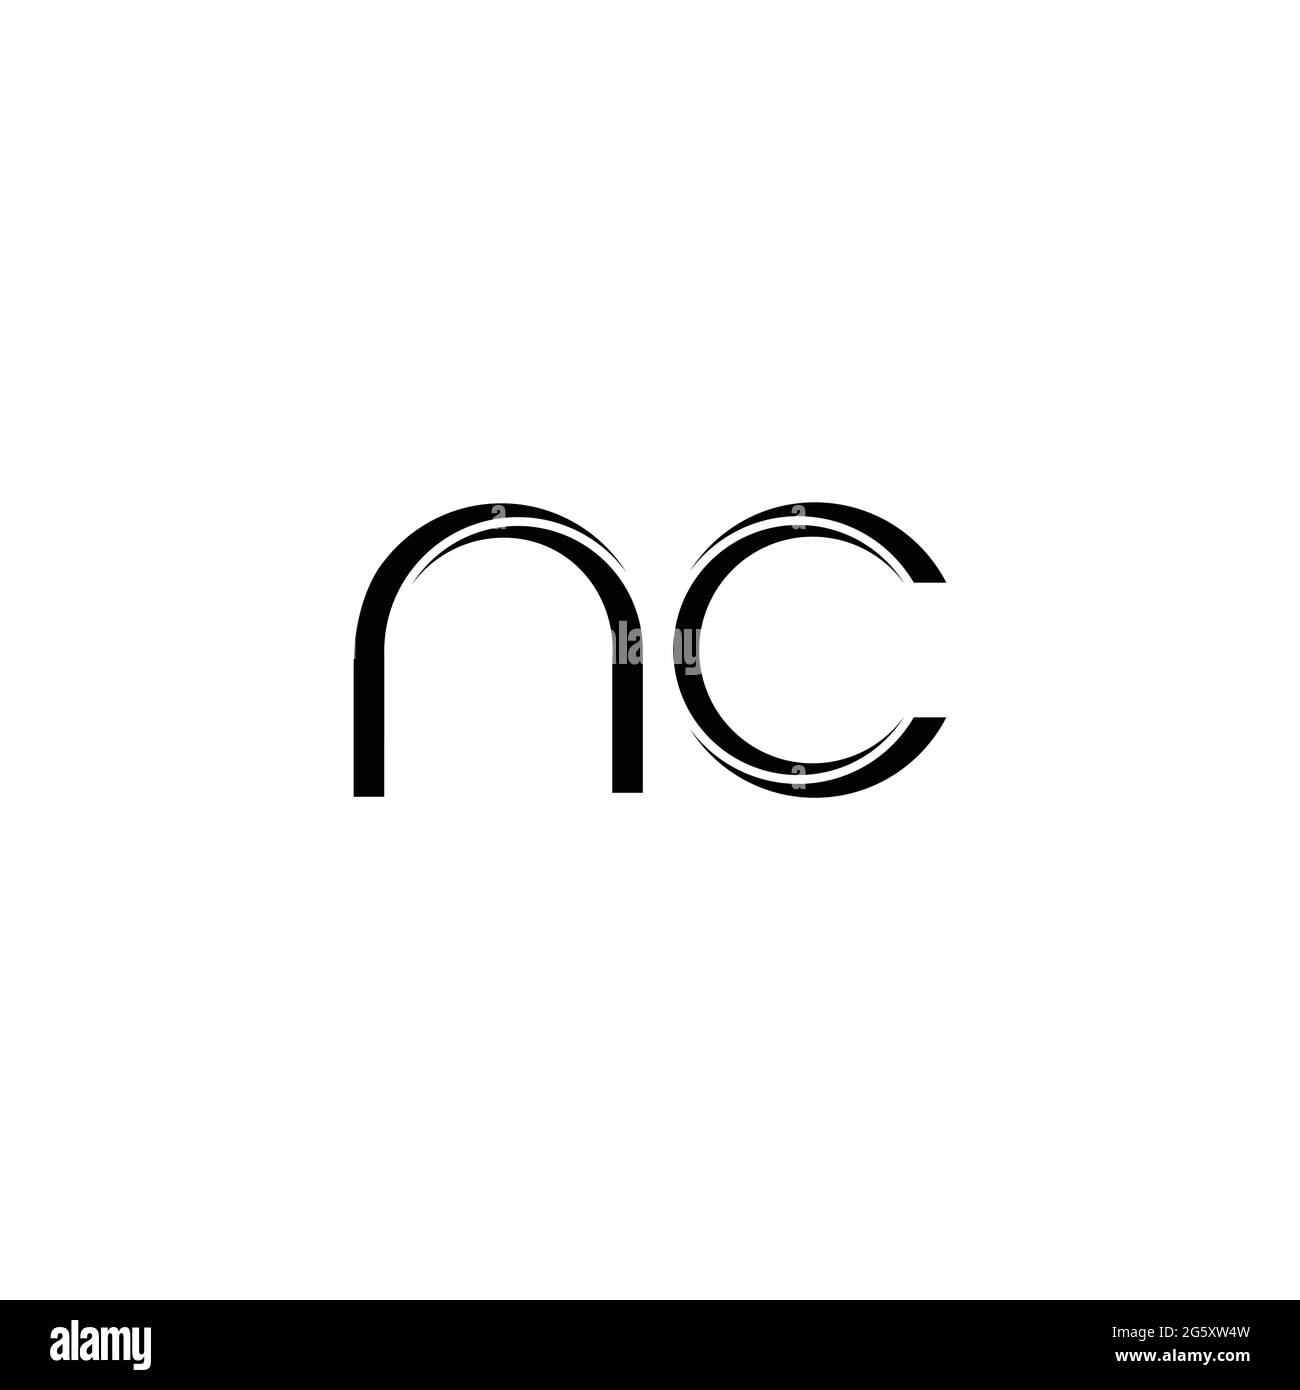 NC Logo monogram with slice rounded modern design template isolated on ...